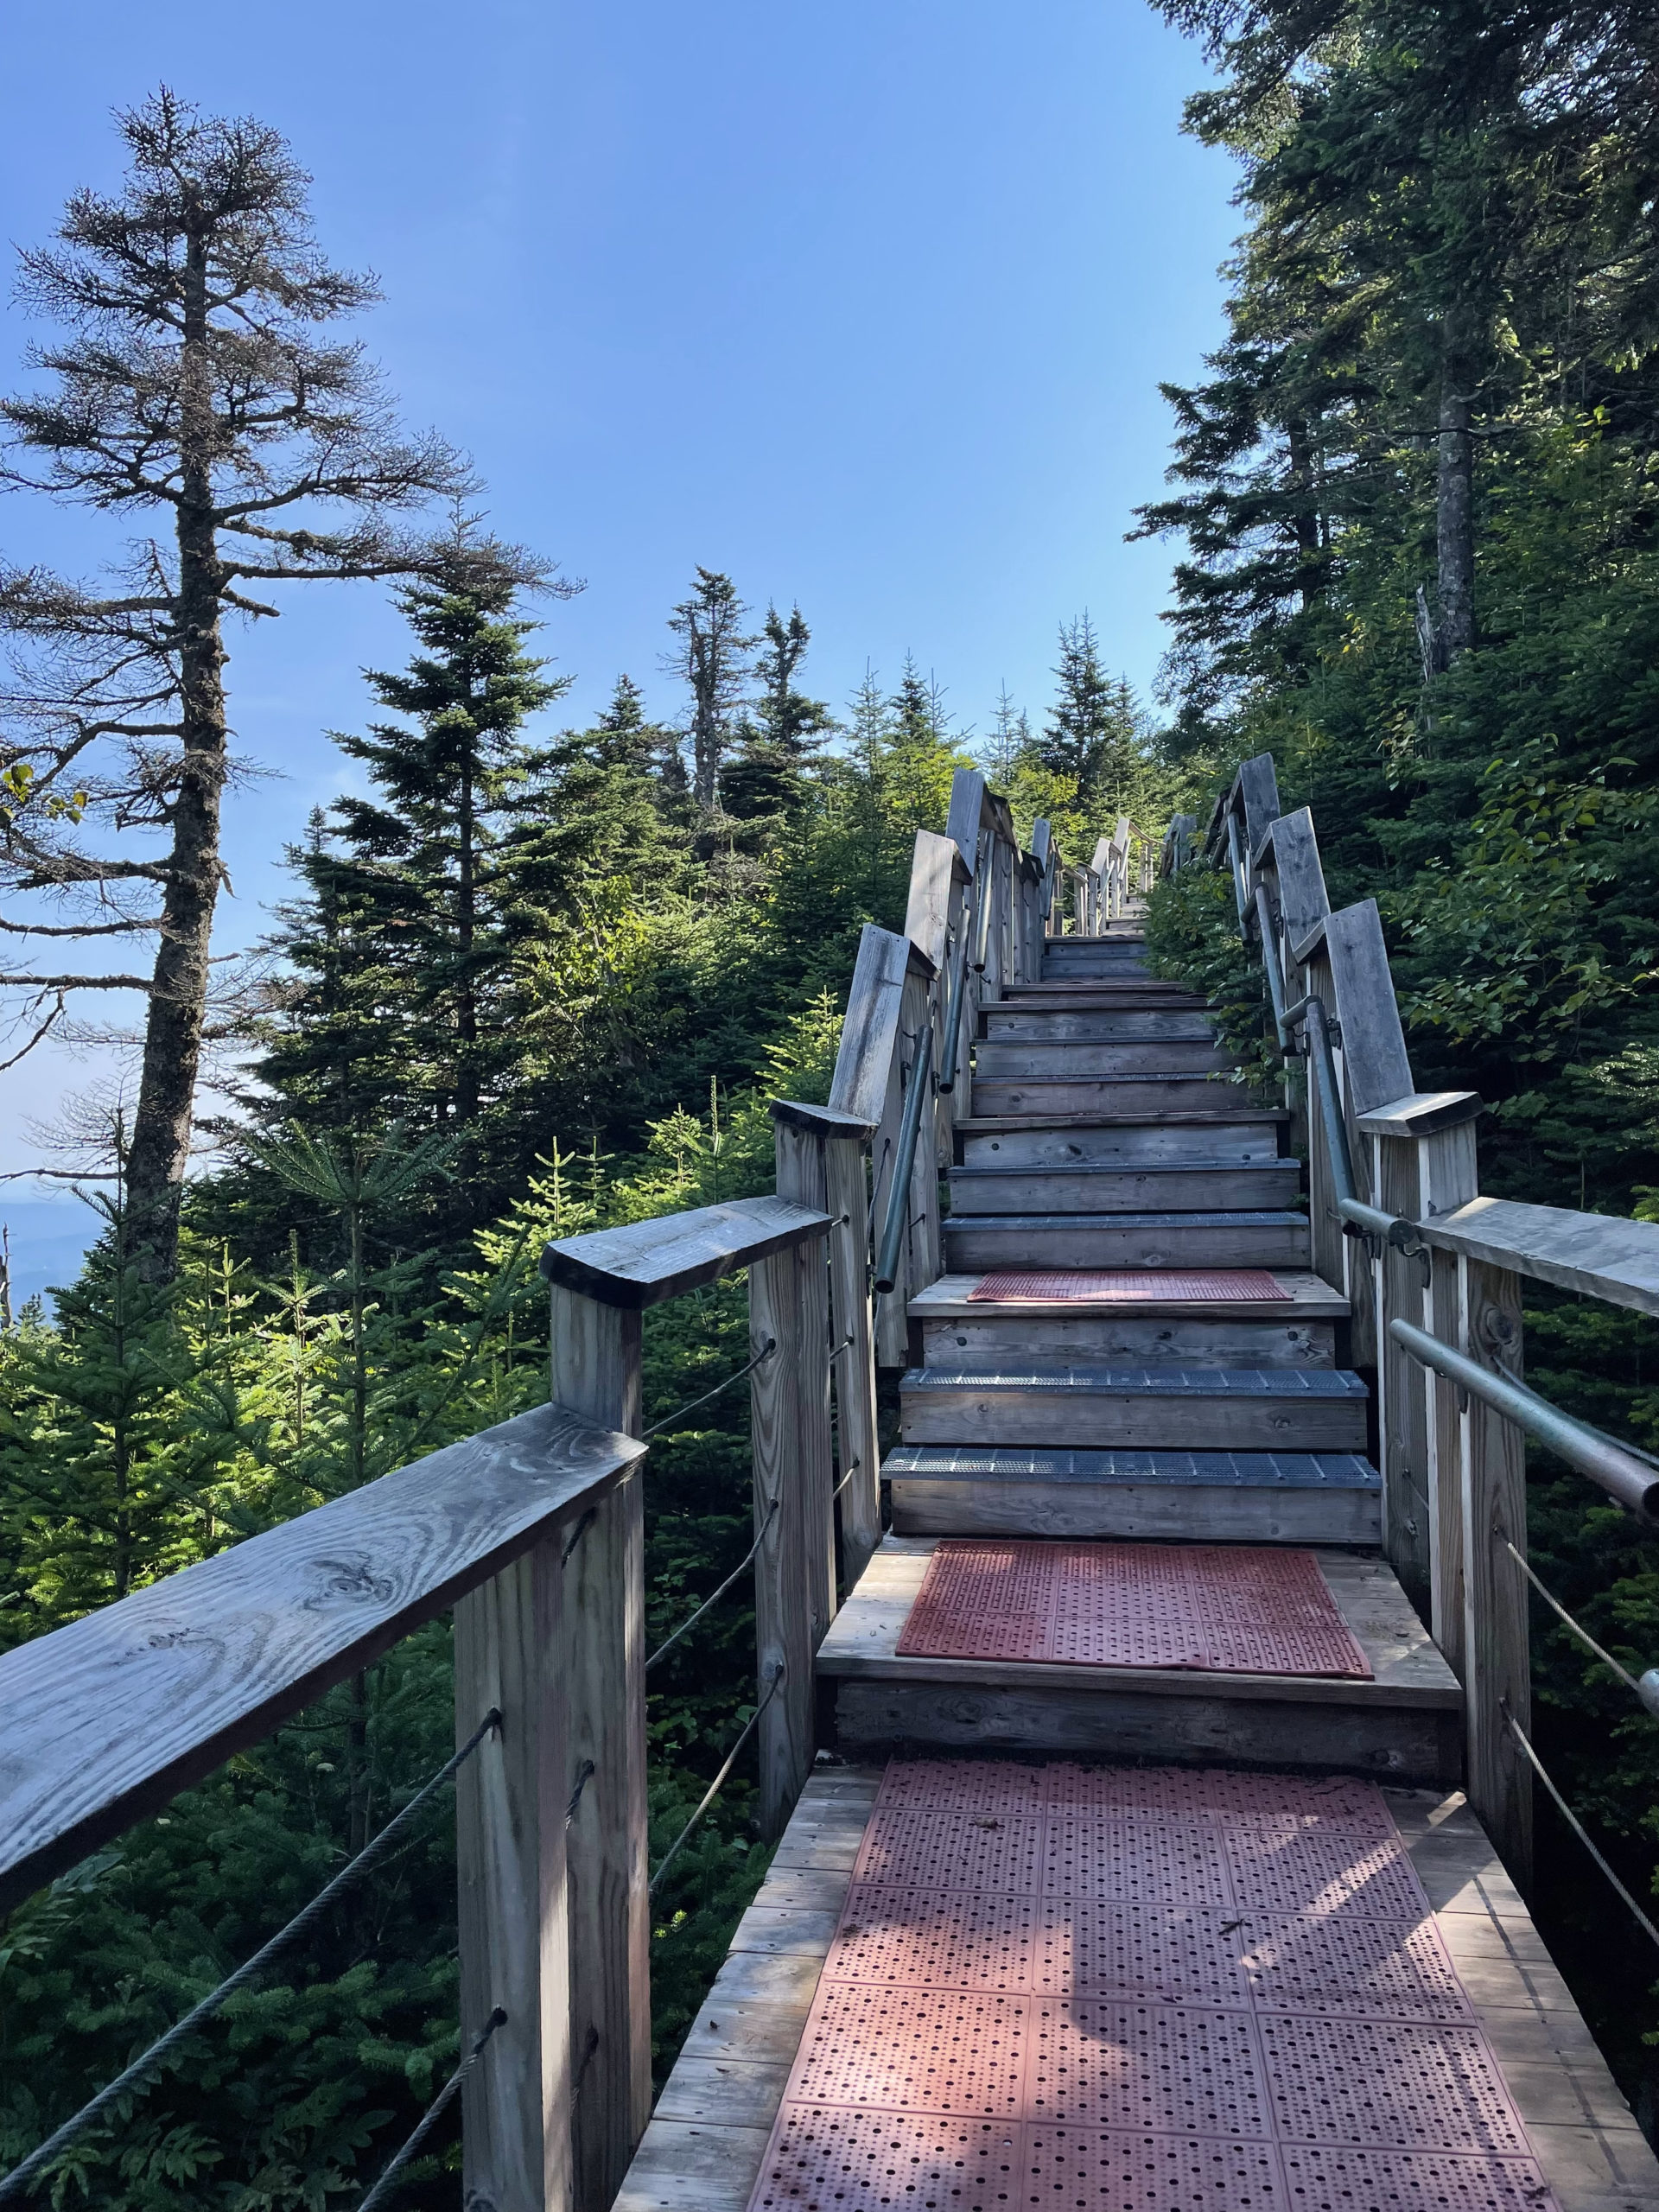 Stairs near the summit, seen while hiking Killington Peak in the Green Mountains, Vermont